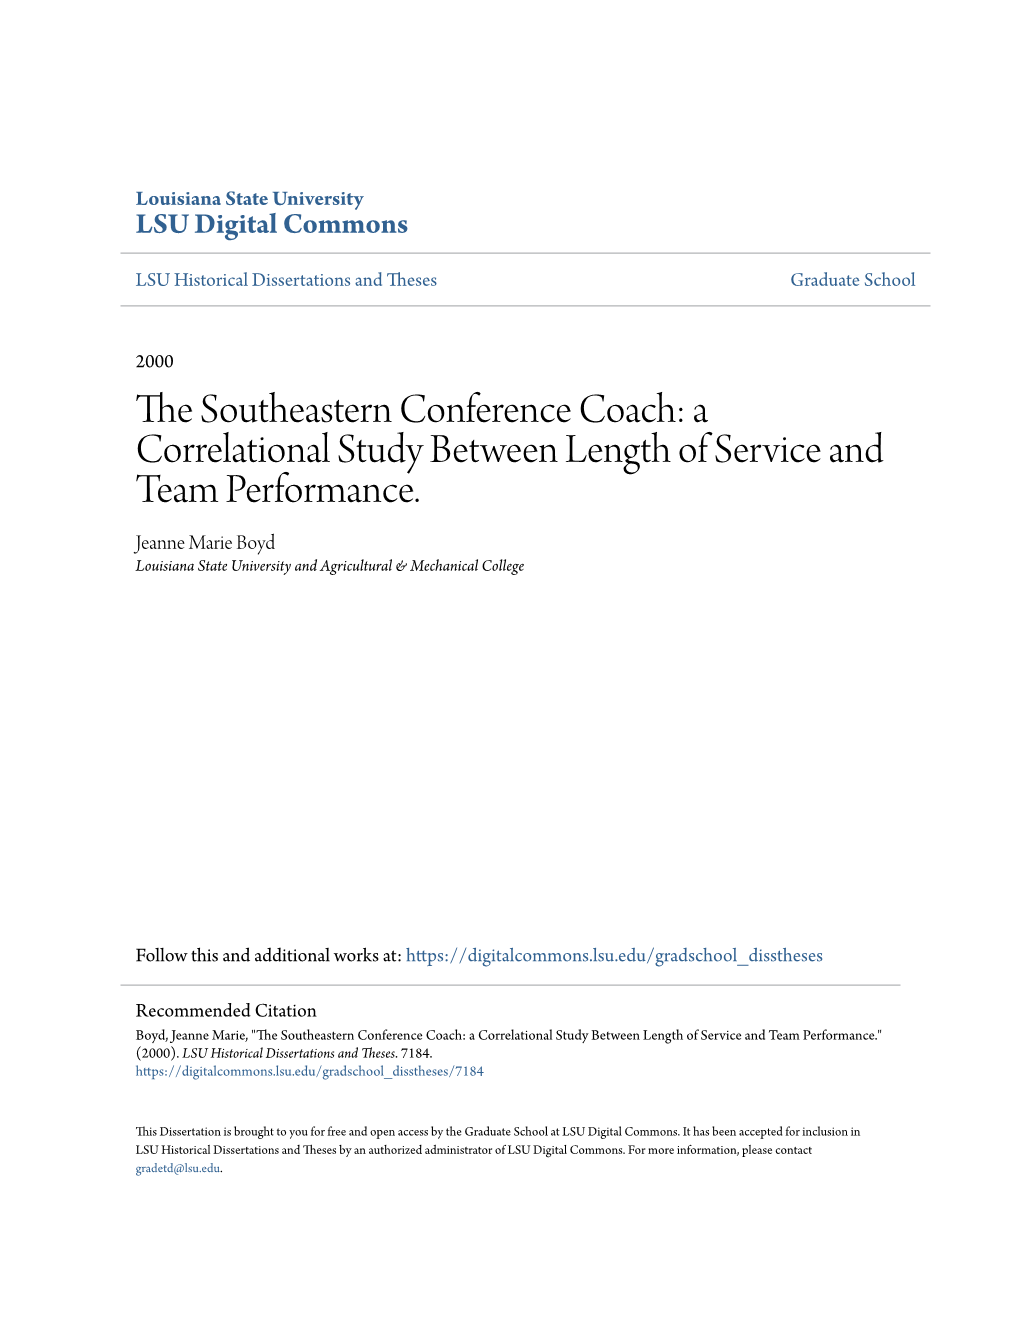 The Southeastern Conference Coach: a Correlational Study Between Length of Service and Team Performance